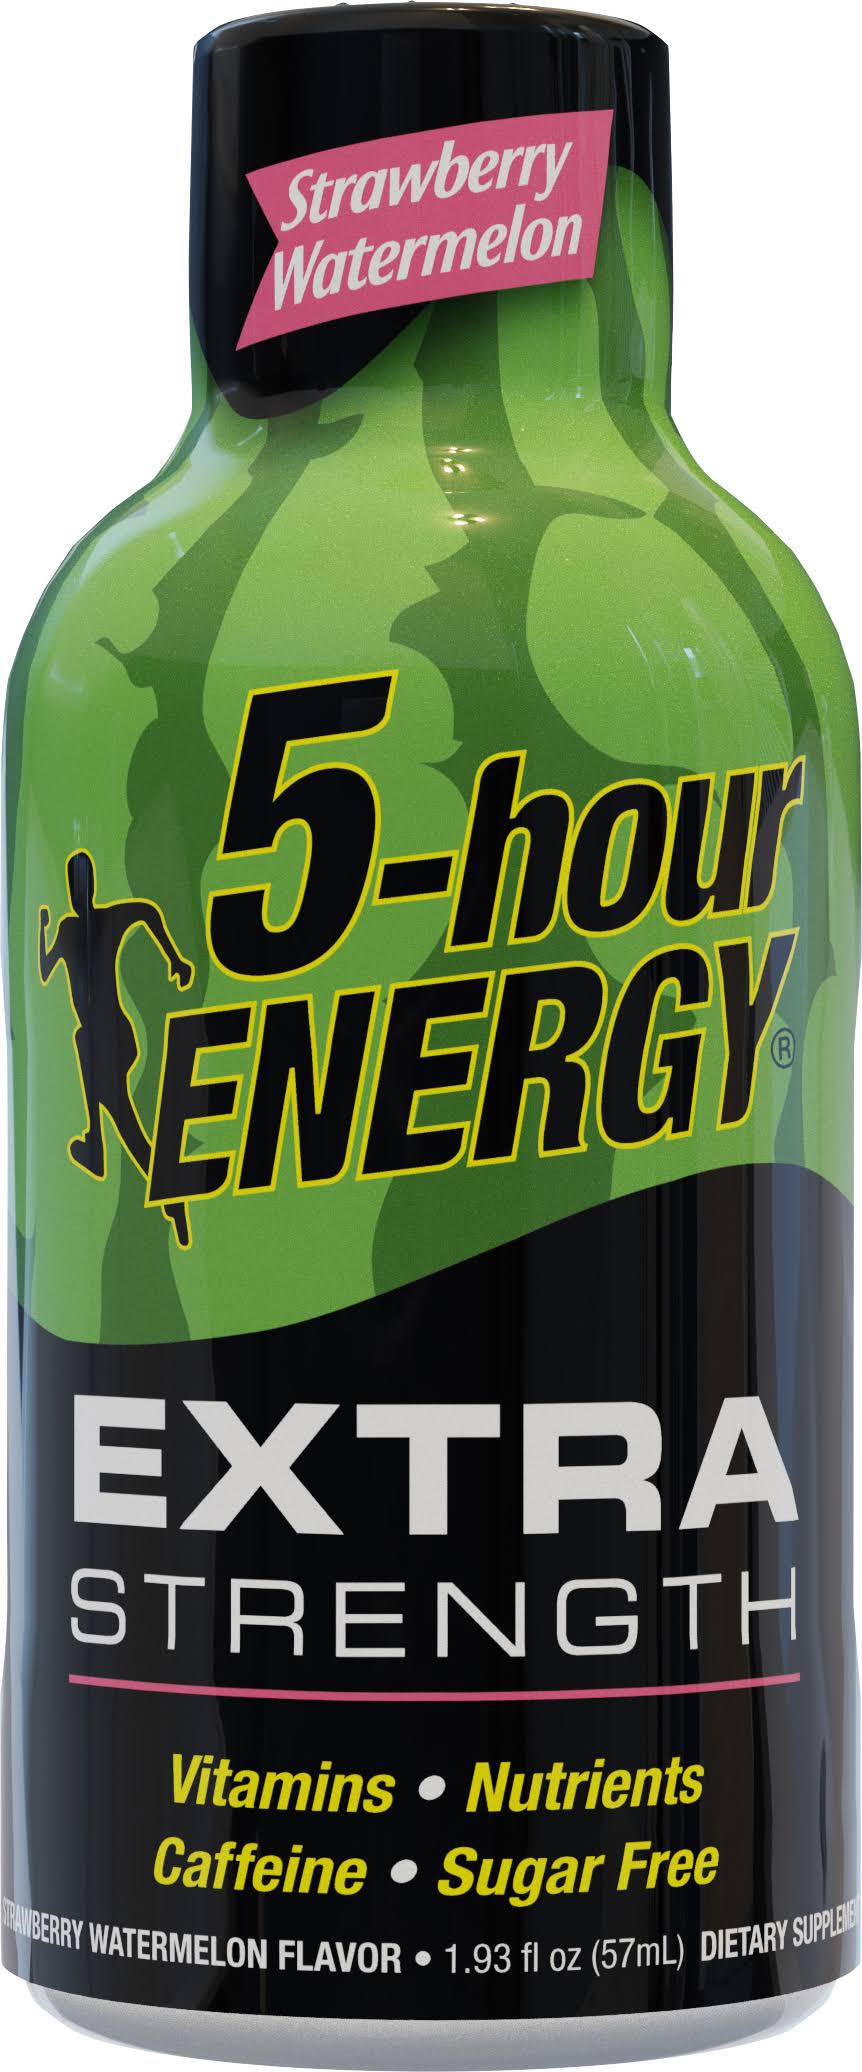 5-hour Energy Extra Strength Dietary Supplement - Strawberry Watermelon